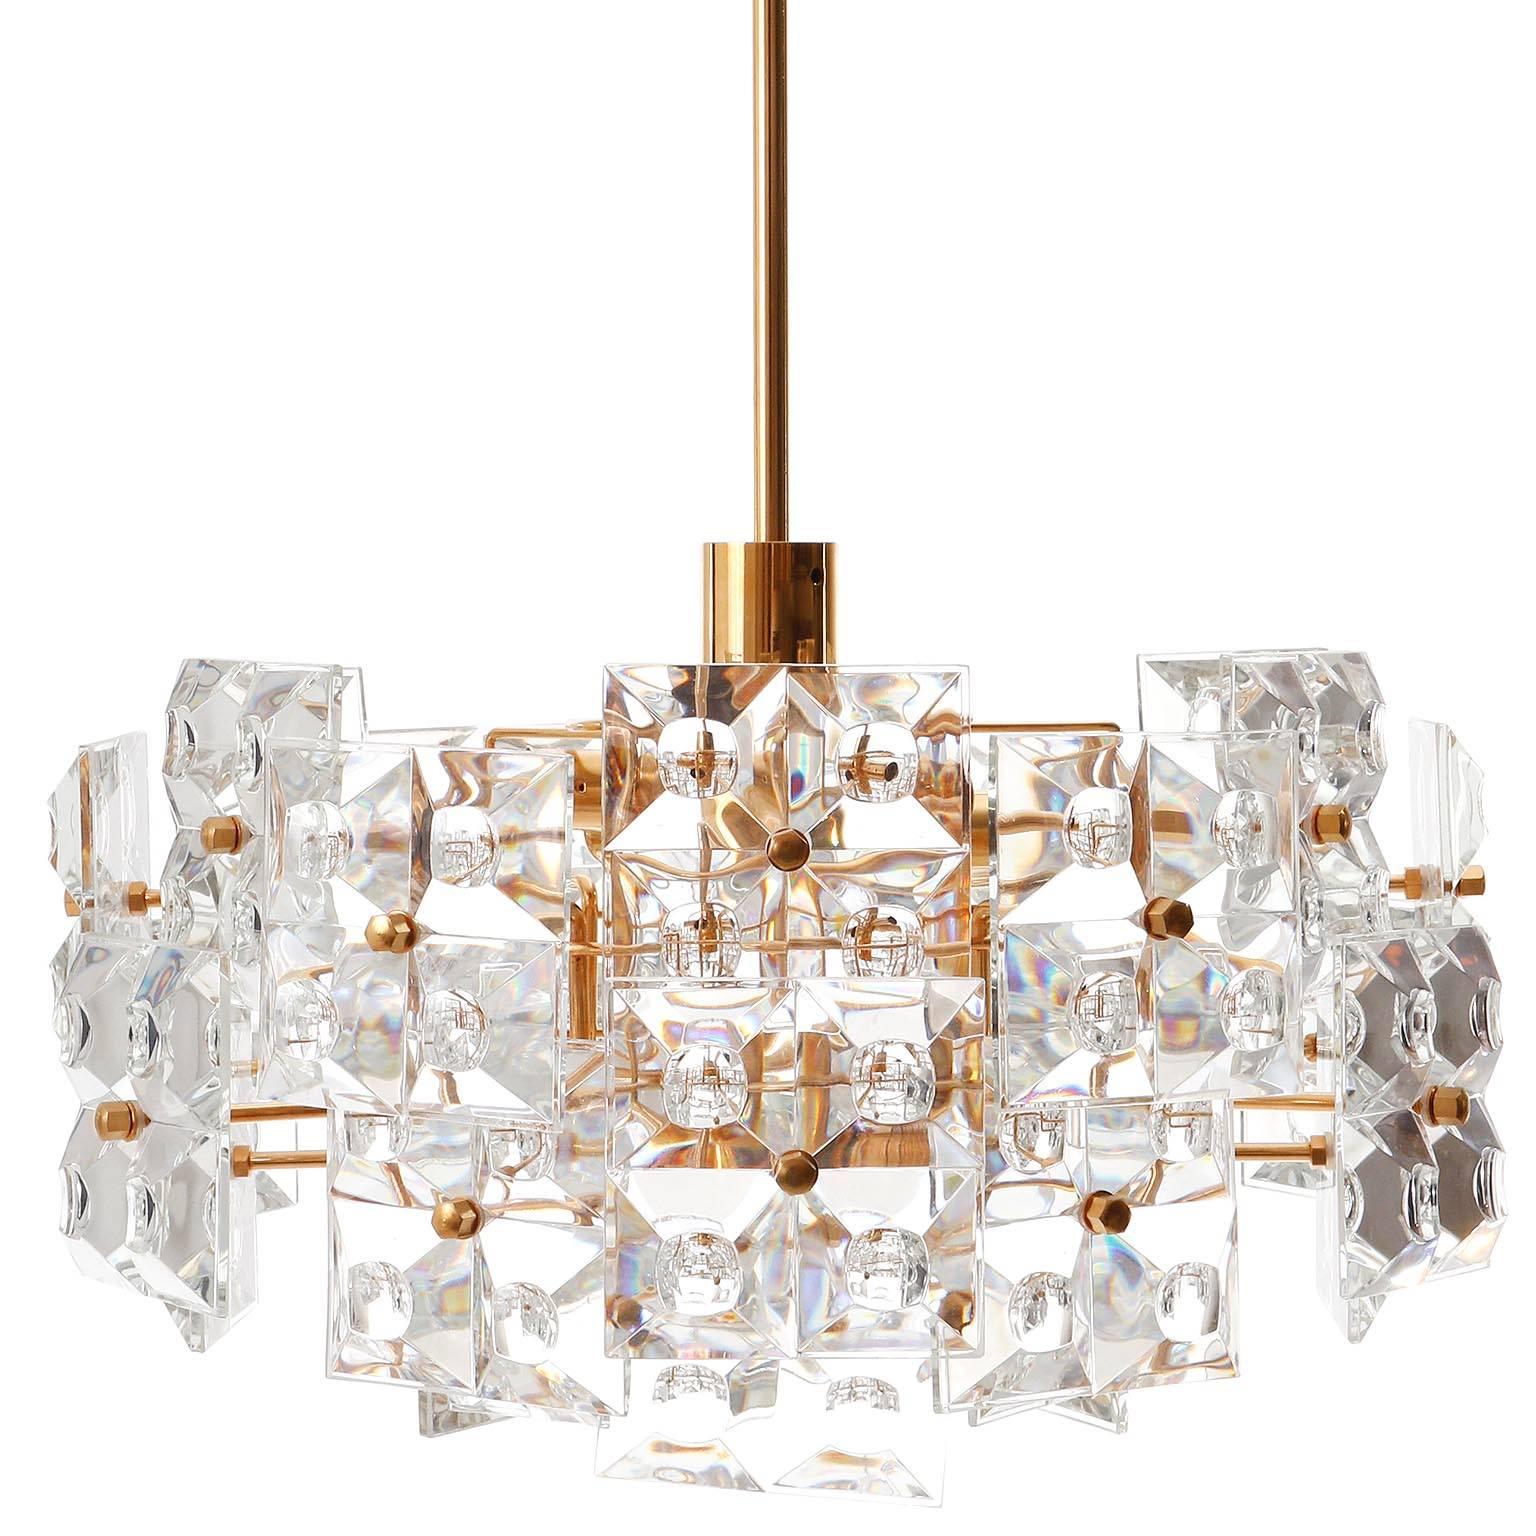 A very exclusive and high quality chandelier by Kinkeldey, Germany, manufactured in mid-century, circa 1970 (late 1960s or early 1970s). It is made of a gilded / gilt frame which holds large cut crystal glass with the dimensions of 4 x 4 in. (10 x